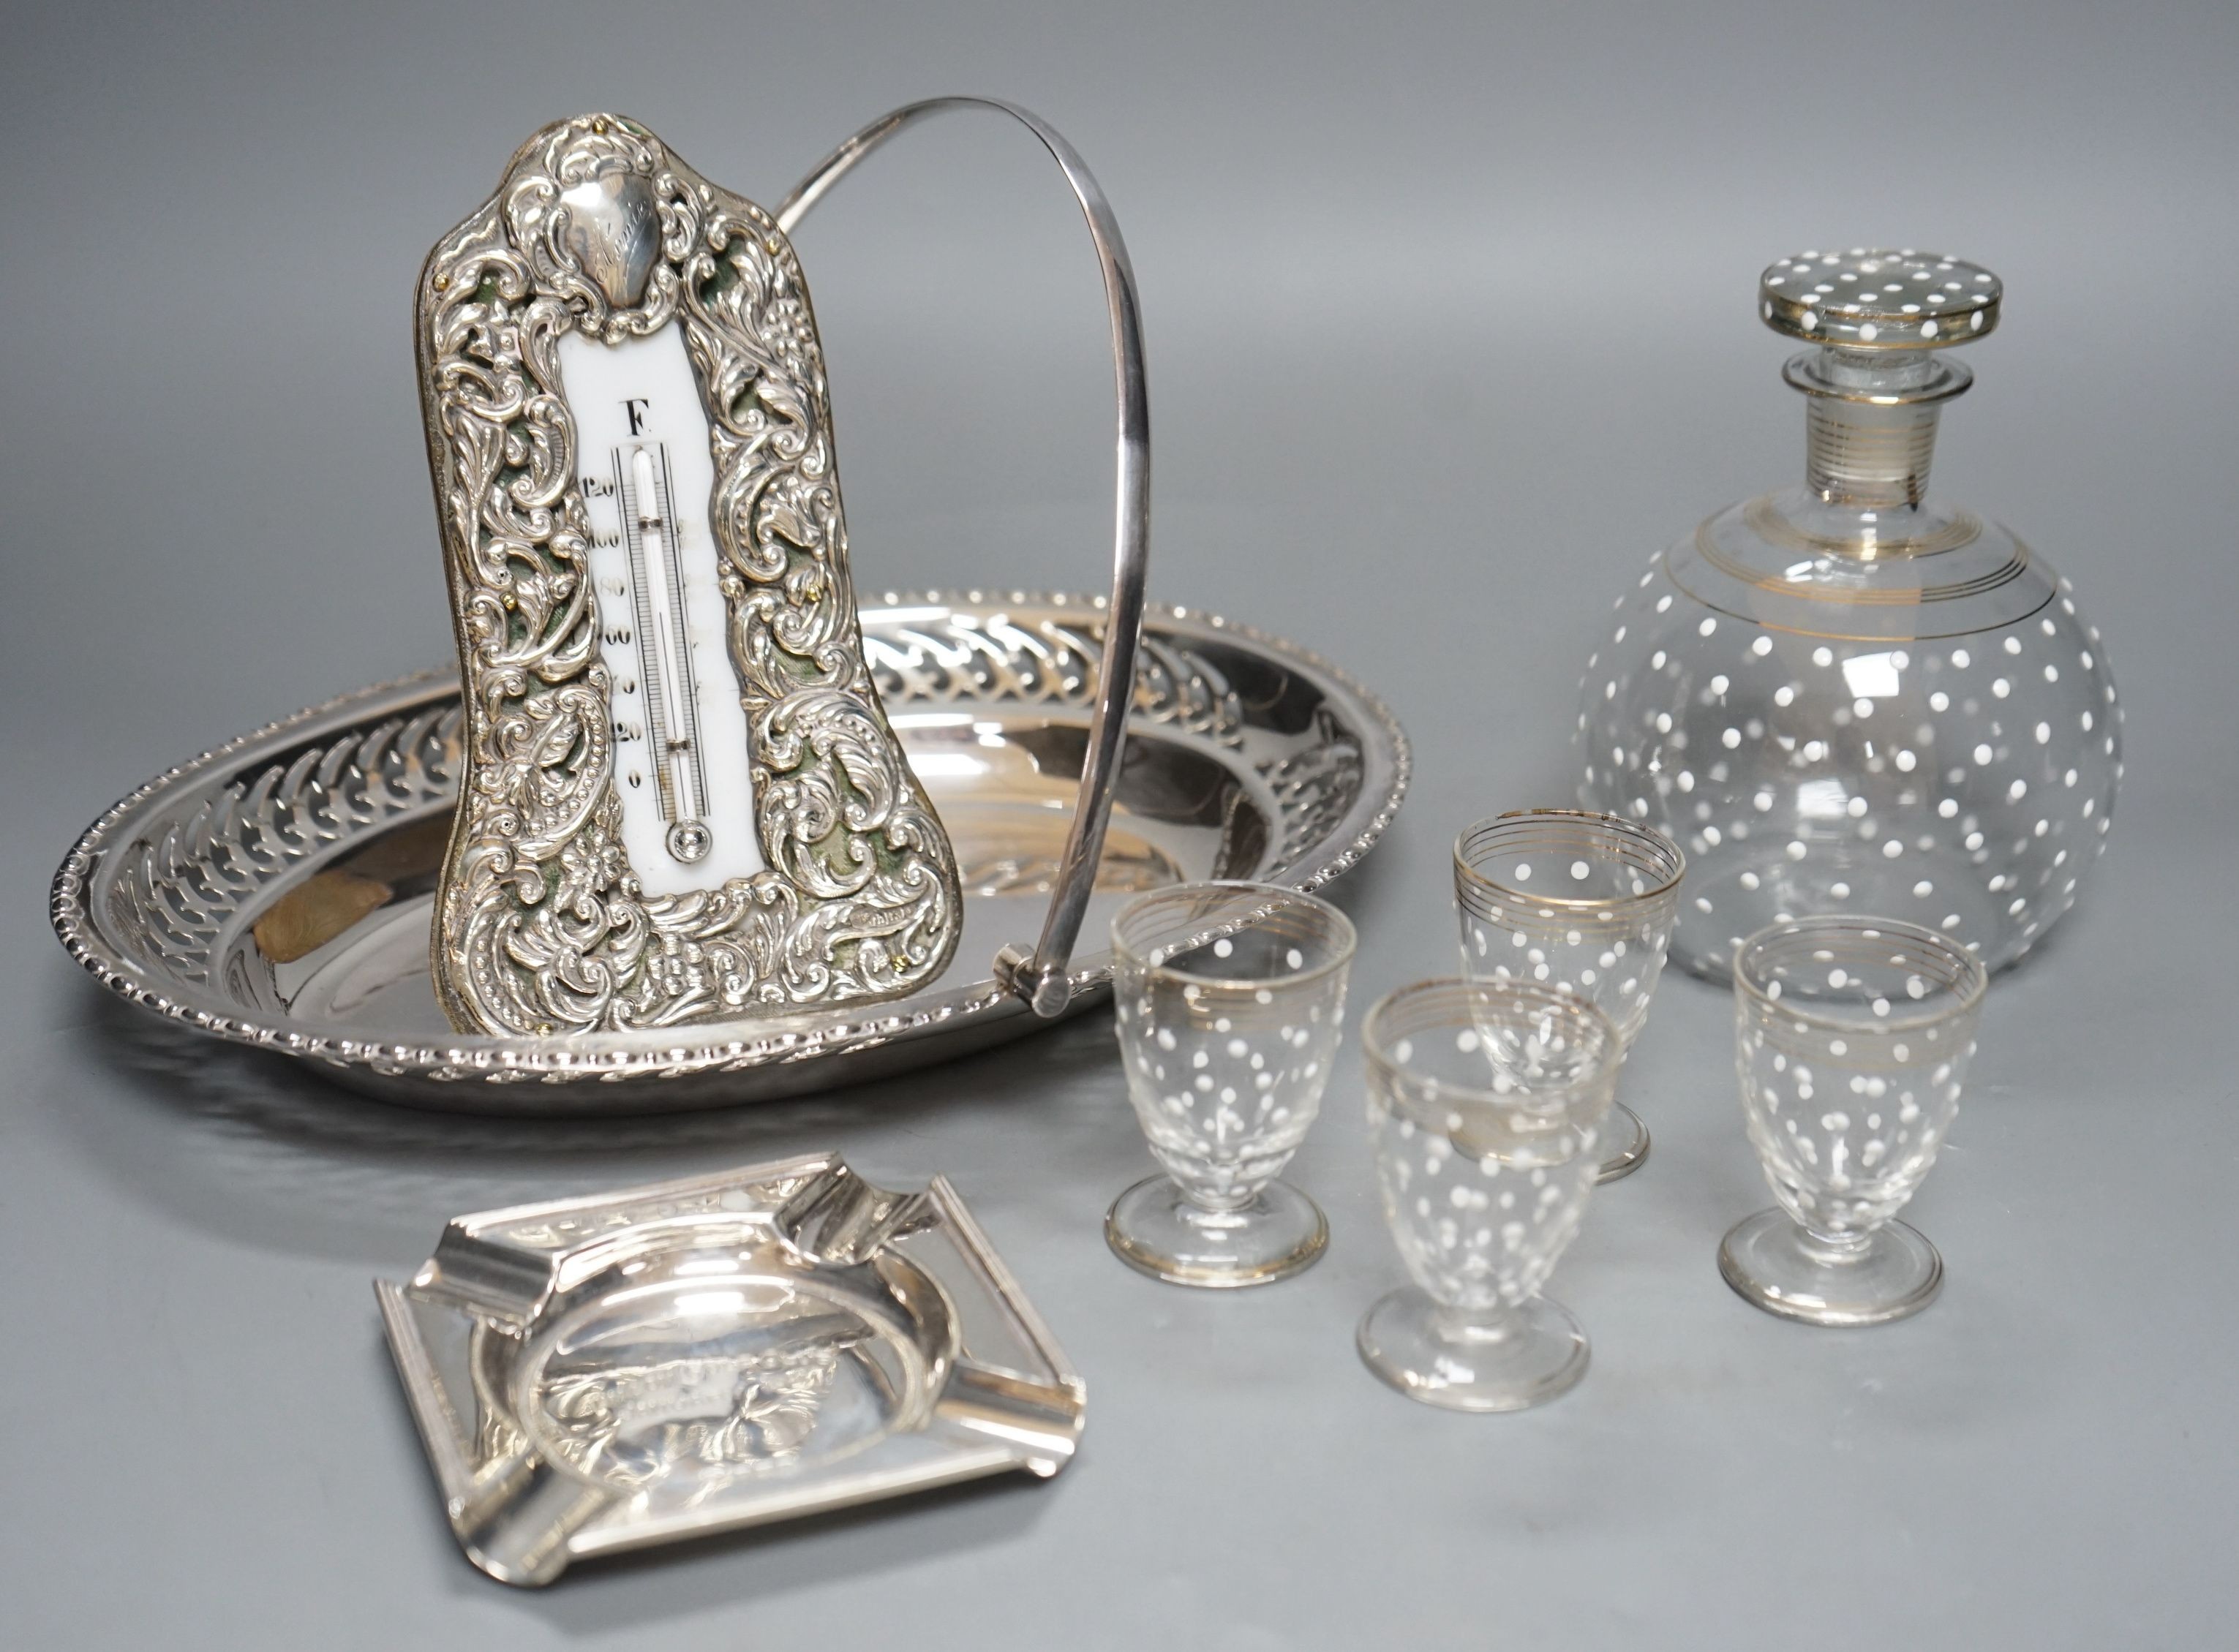 A silver-mounted Victorian thermometer, silver ashtray, plated basket stand, a small enamelled decanter and 4 matching glasses, thermometer 17.5cms high